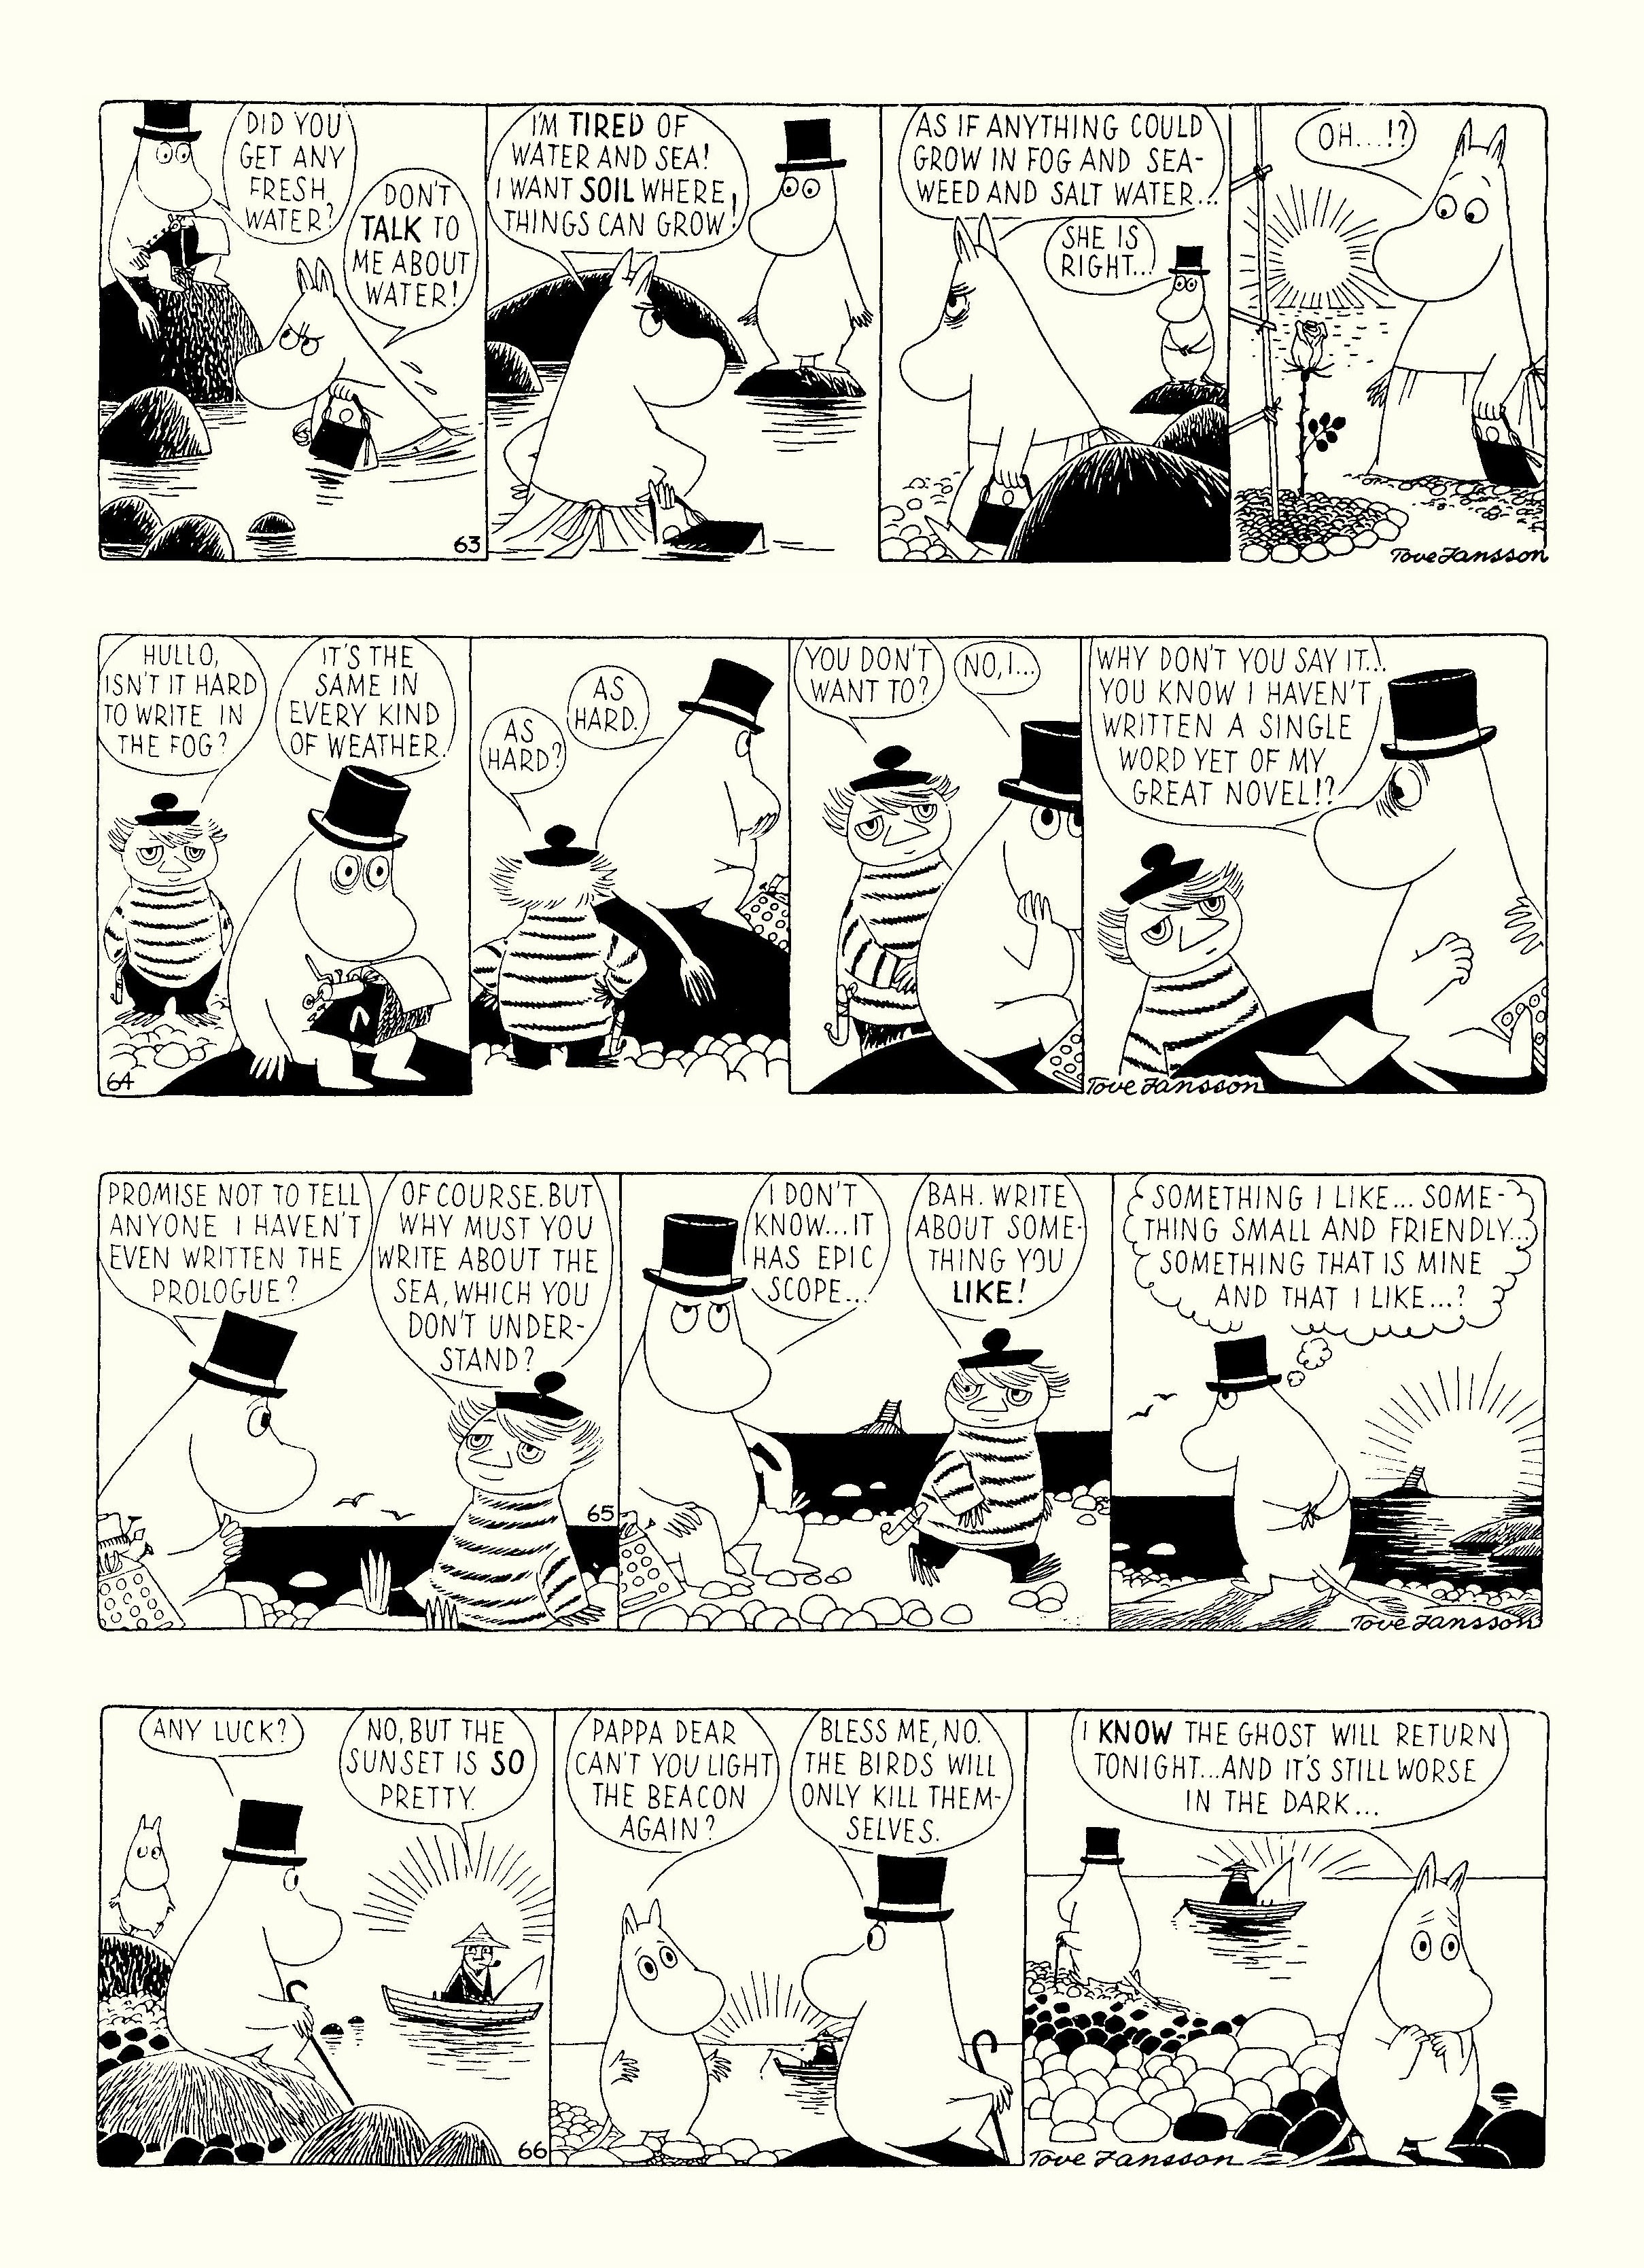 Read online Moomin: The Complete Tove Jansson Comic Strip comic -  Issue # TPB 3 - 71